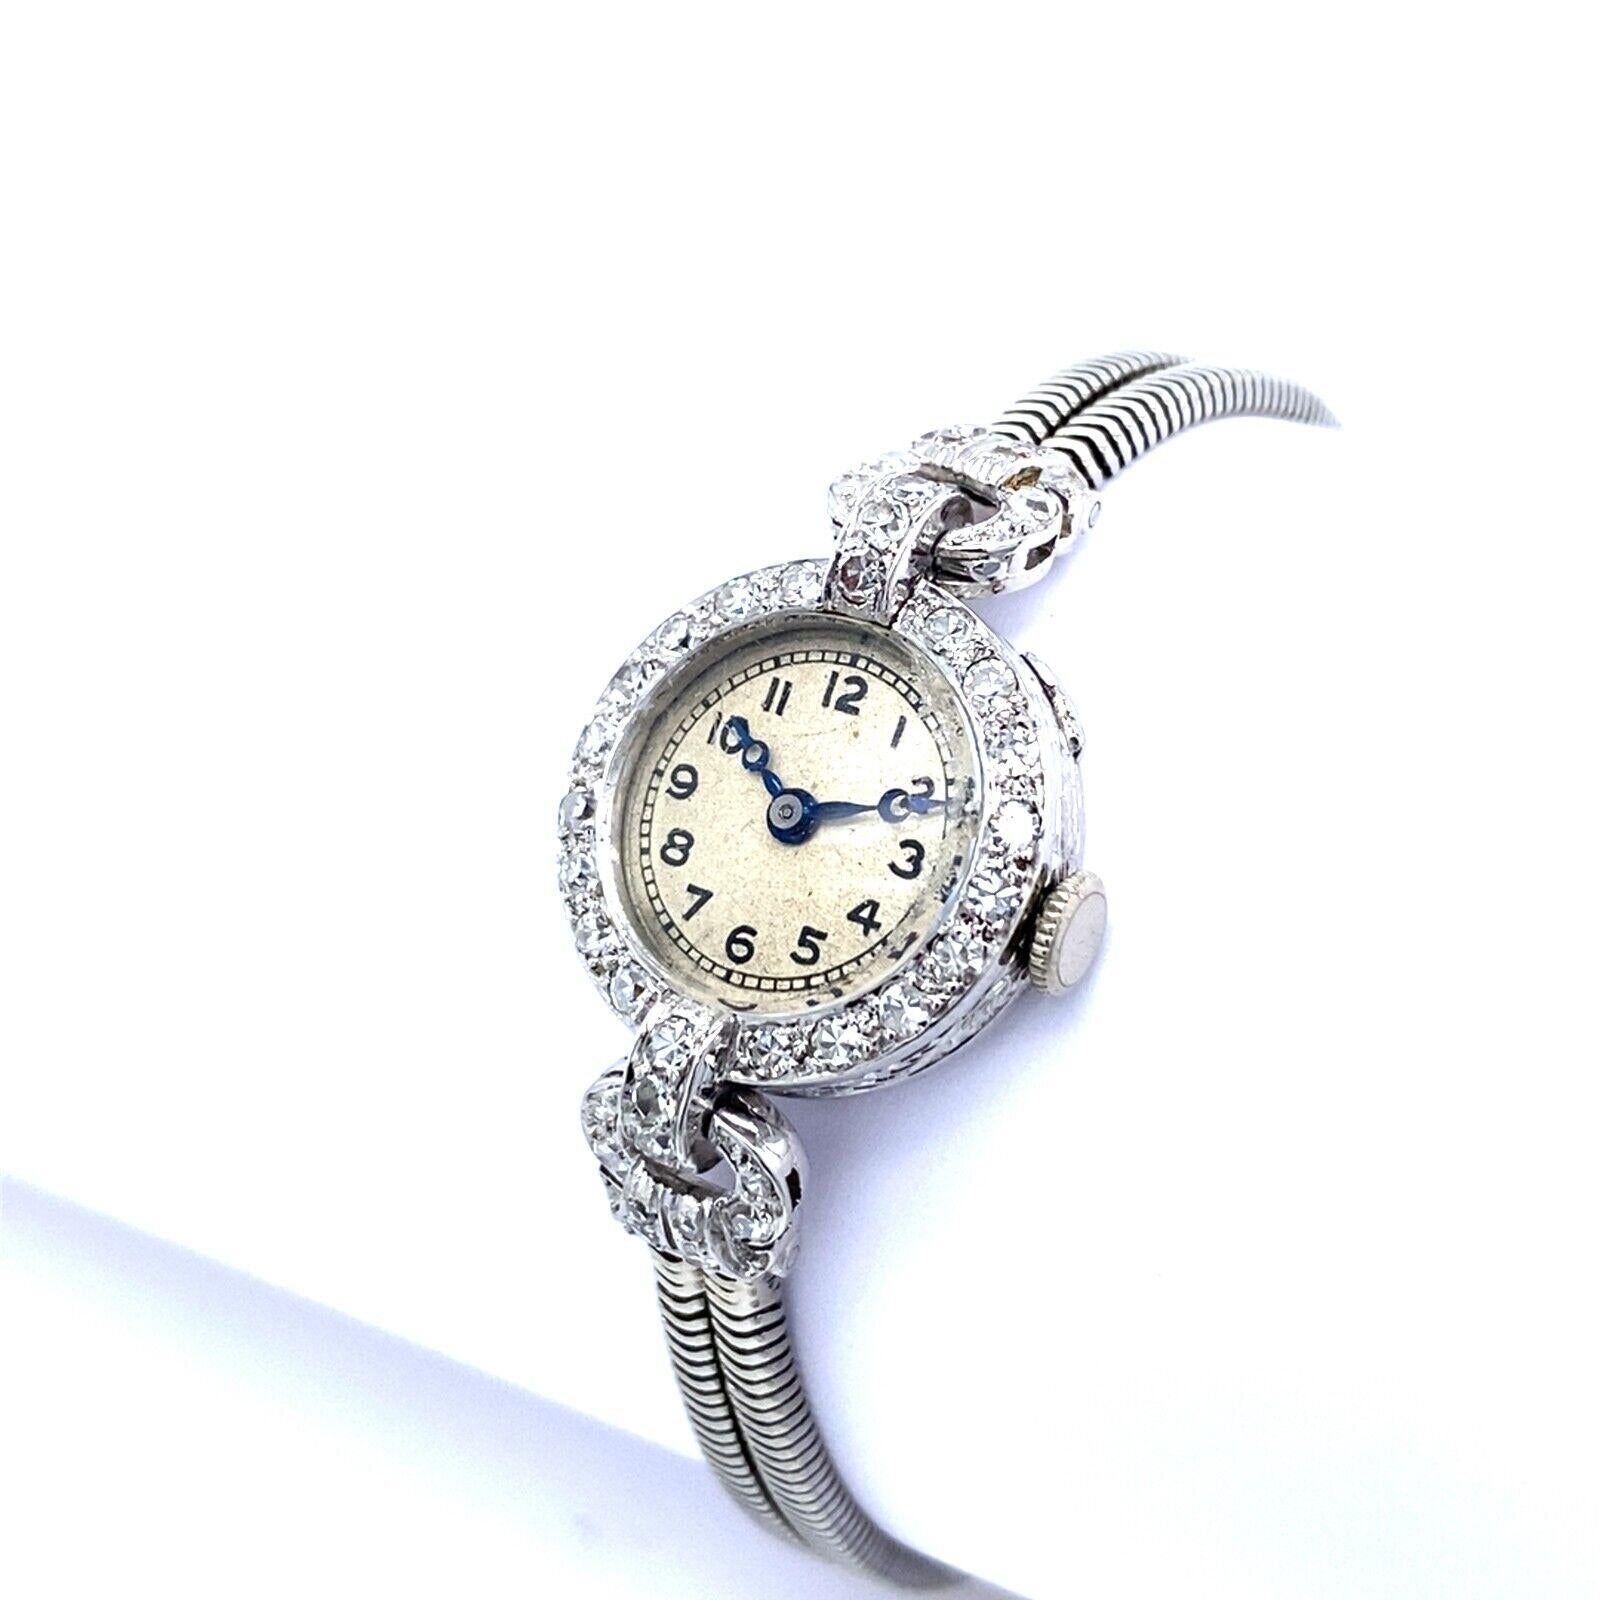 This stunning art deco Vertex-Supreme watch features a platinum case with 9ct White Gold 2 row strap, 0.80ct of Diamonds. The dial has been designed with a stunning art deco design with a touch of modernity and a dash of uniqueness.
Fully serviced &